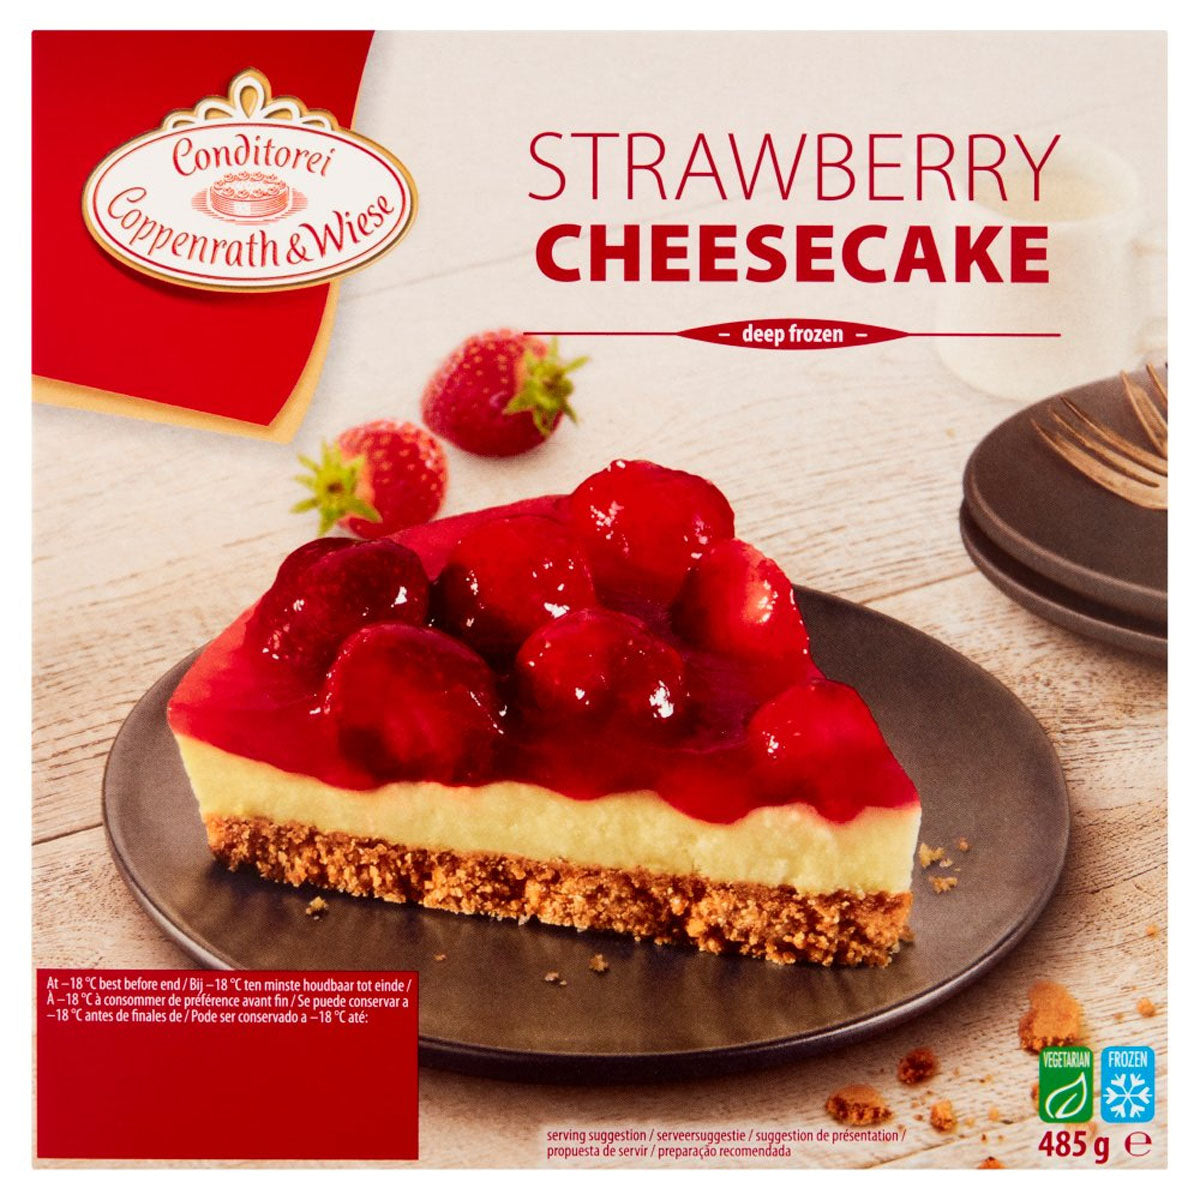 Conditorei Coppenrath & Wiese - Strawberry Cheesecake - 485g - Continental Food Store